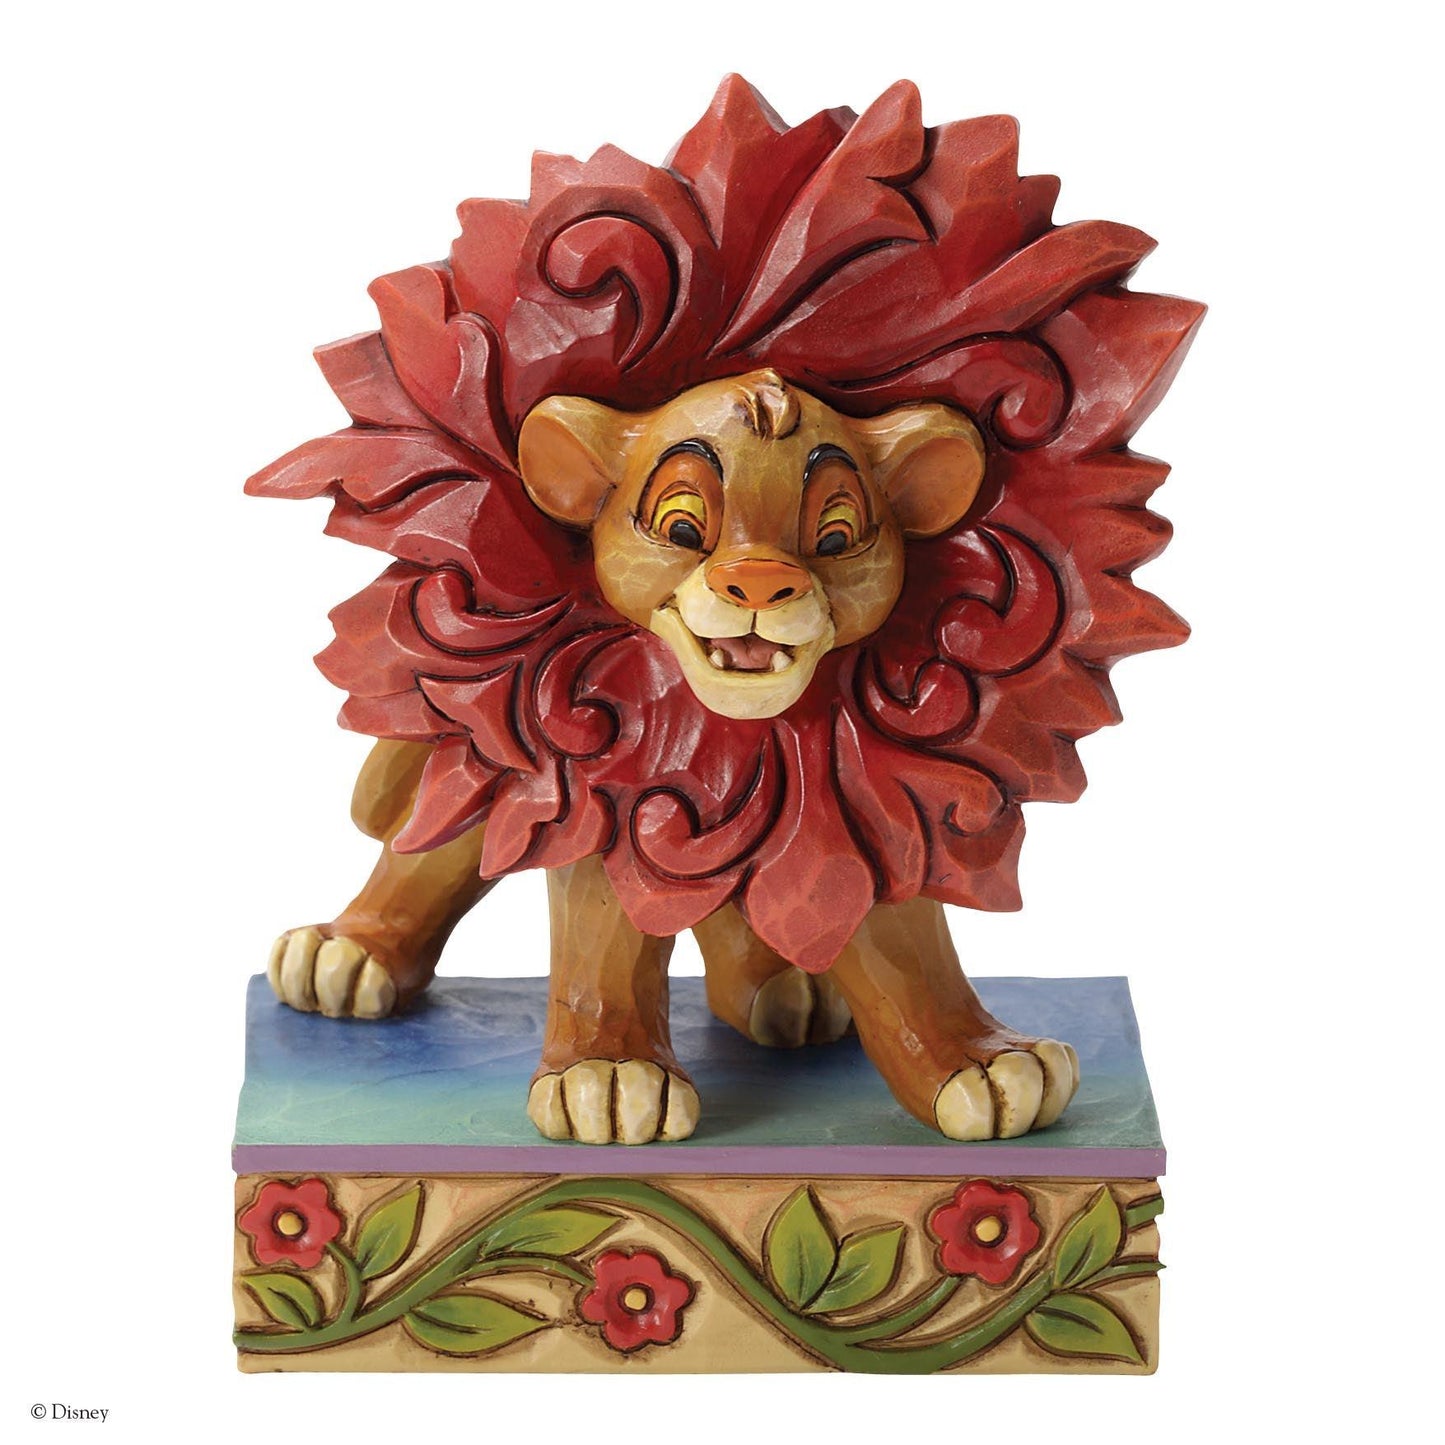 Just Can't Wait To Be King (Simba Figurine) (Disney Traditions by Jim Shore) - Gallery Gifts Online 